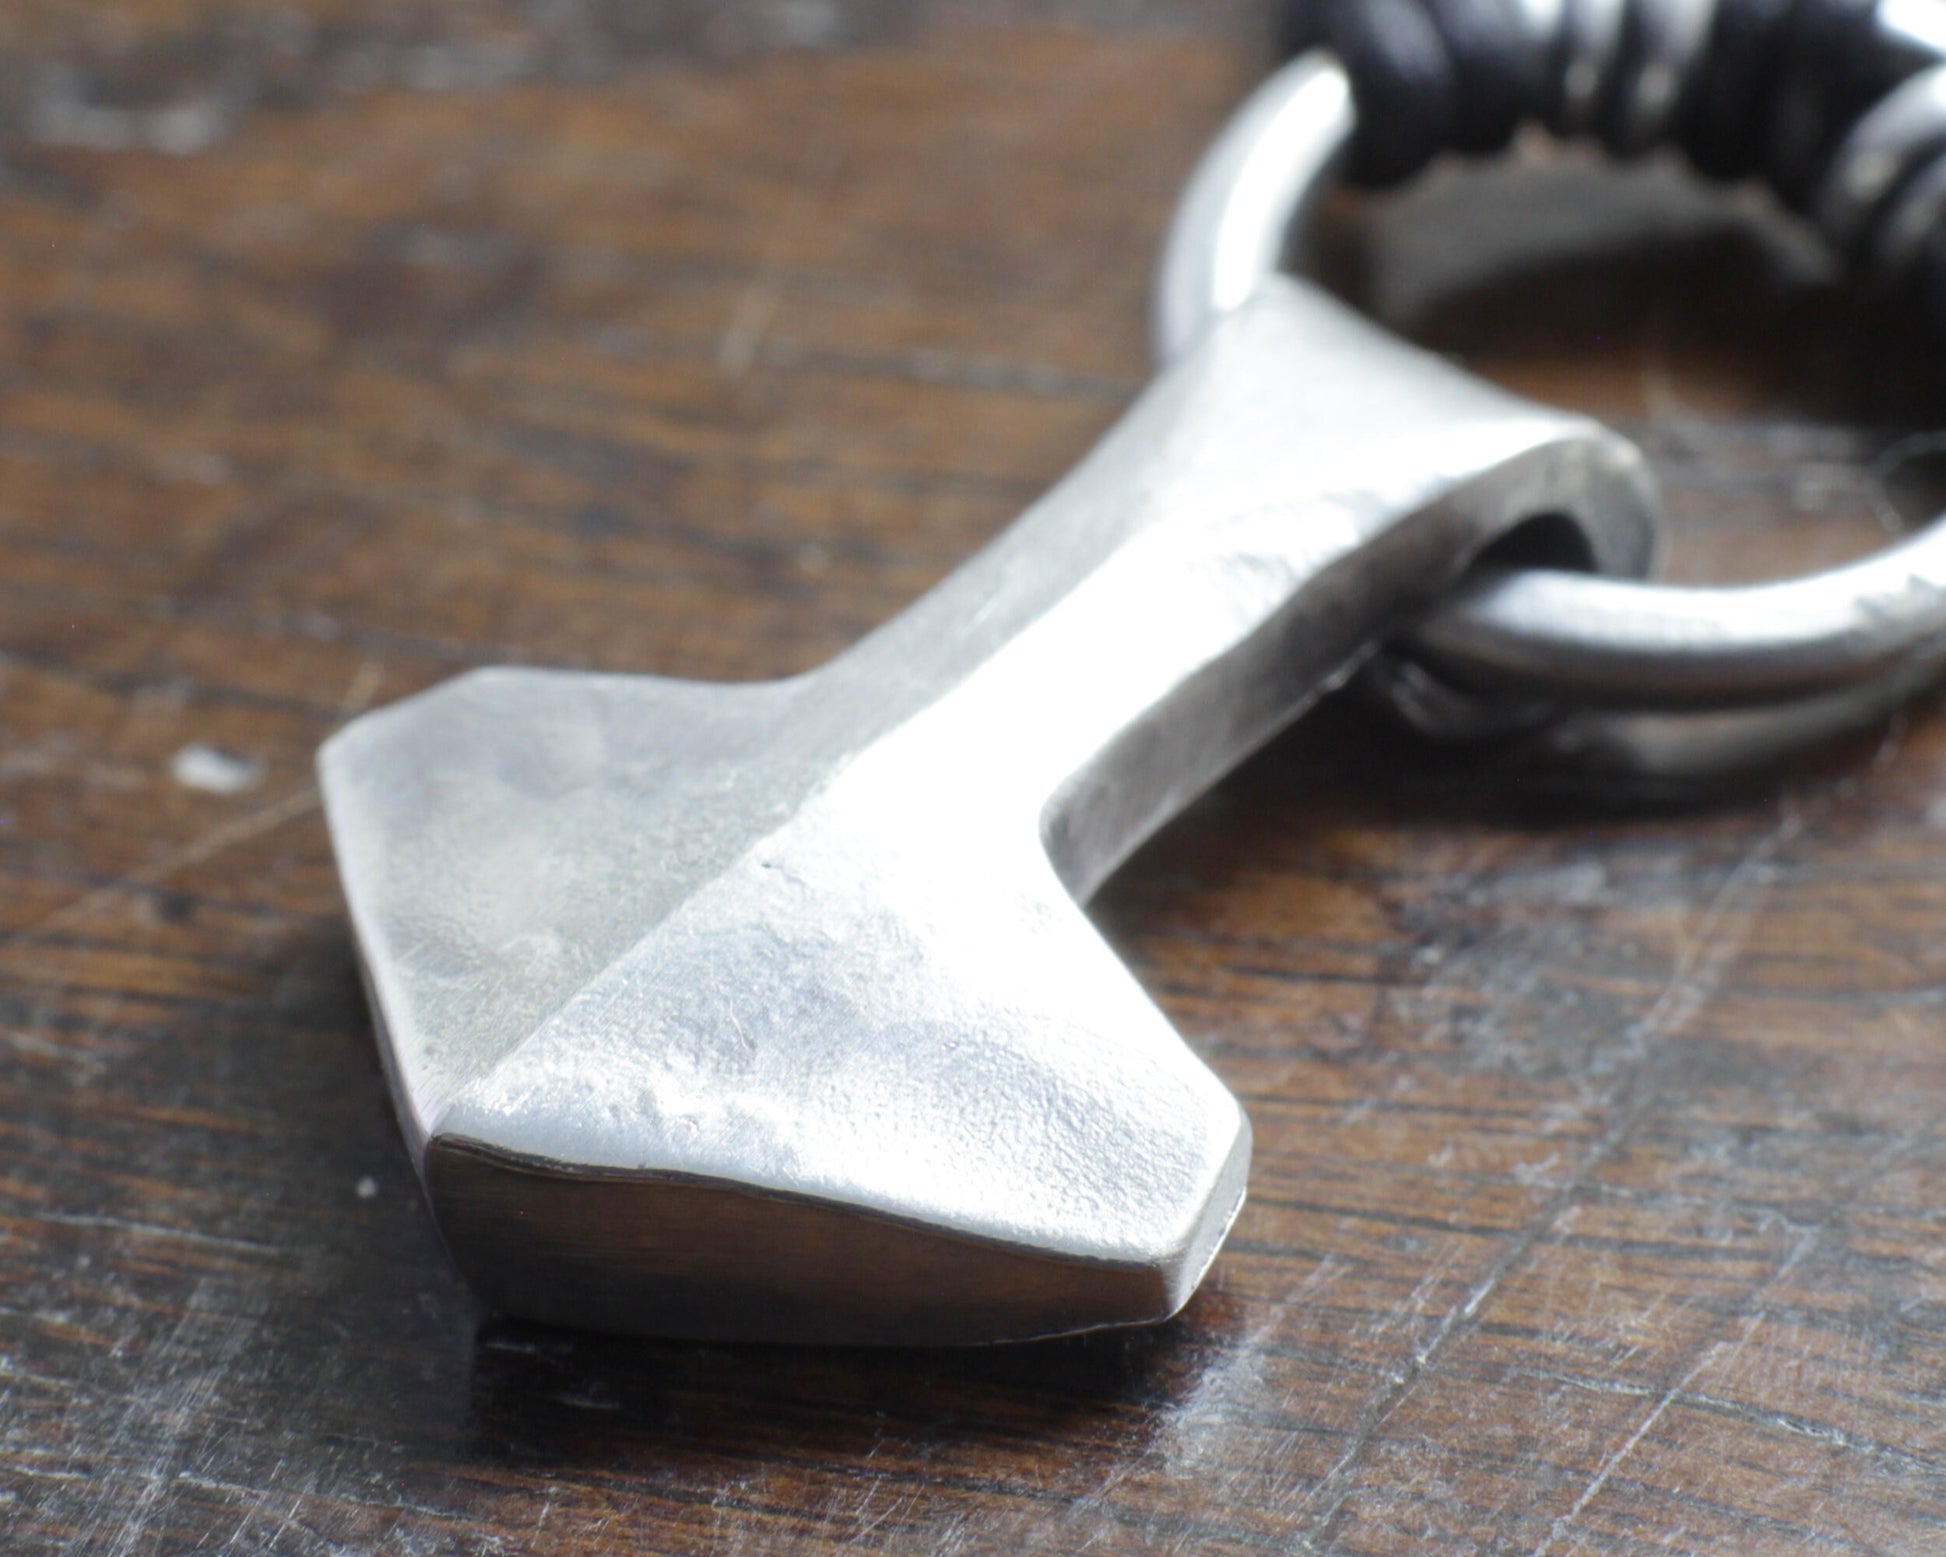 Small hot forged solid silver Thor's Hammer pendant by Marleena Barran, Taitaya Forge